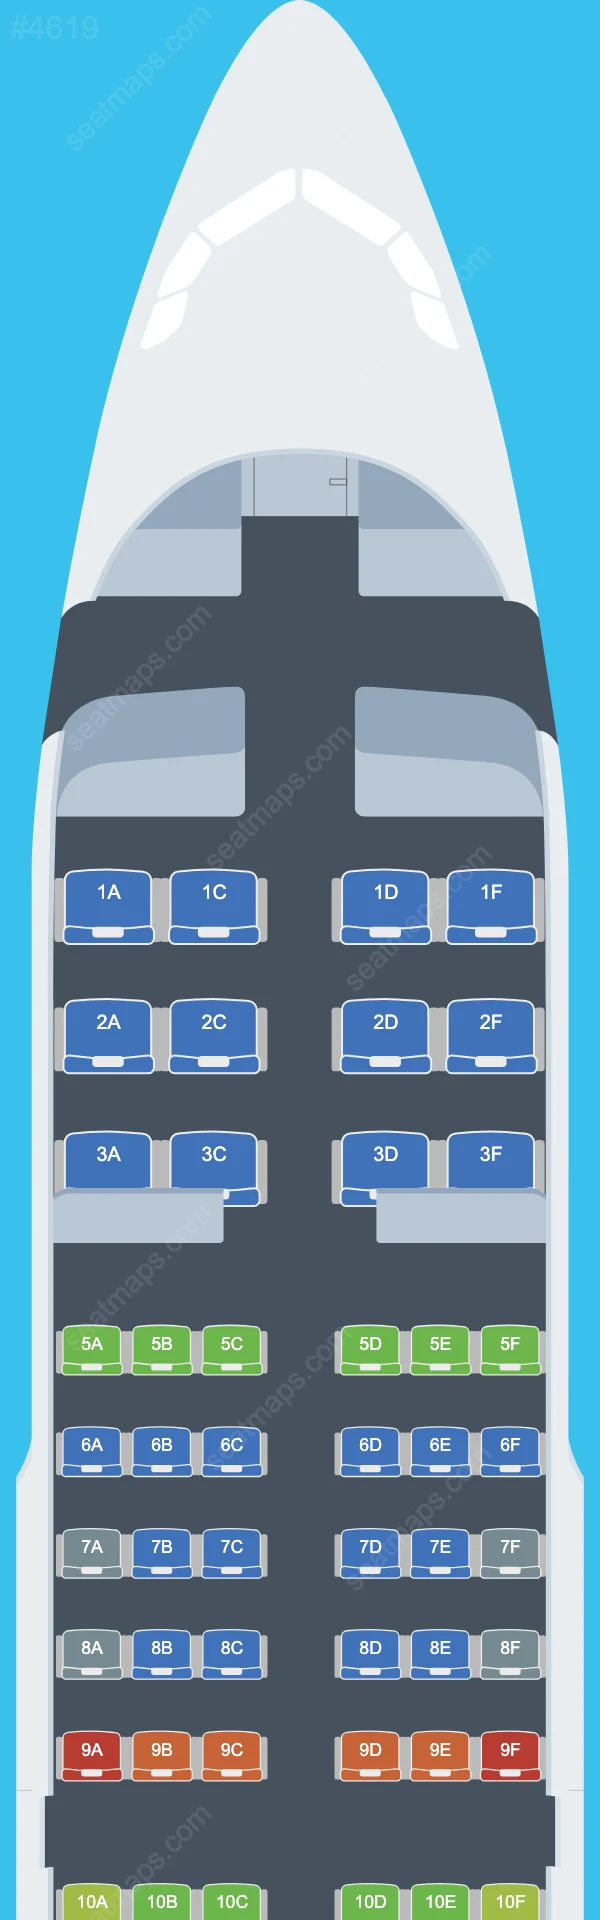 Chengdu Airlines Airbus A319 Seat Maps A319-100 V.2